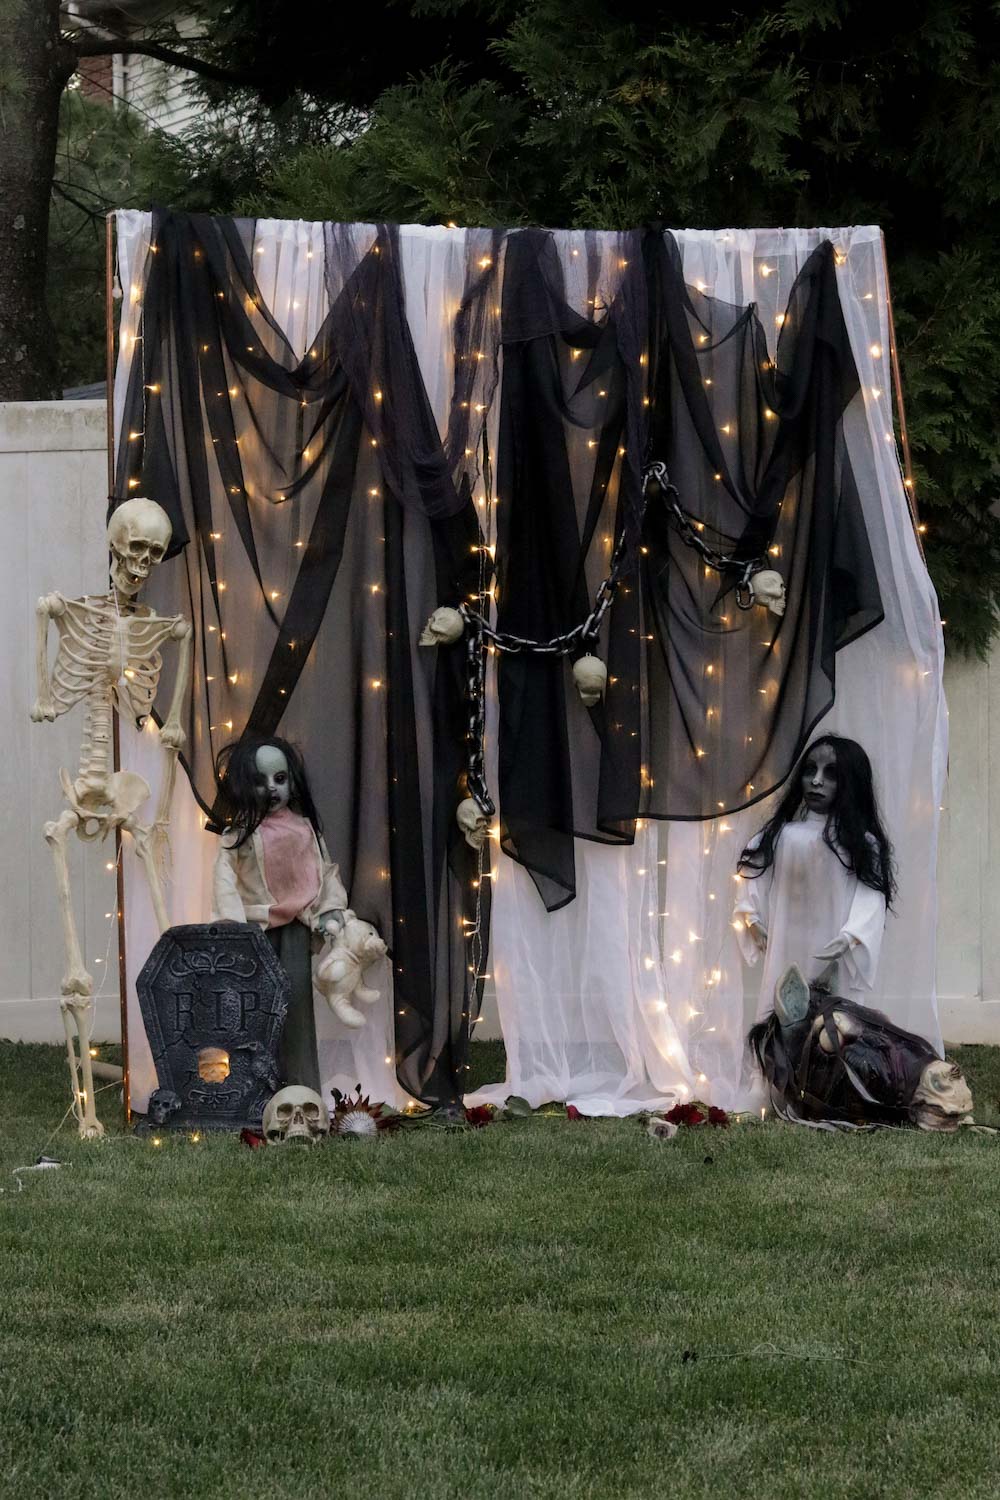 A DIY photo booth decorated with curtain lights, zombie sisters, tombstones, and skulls.